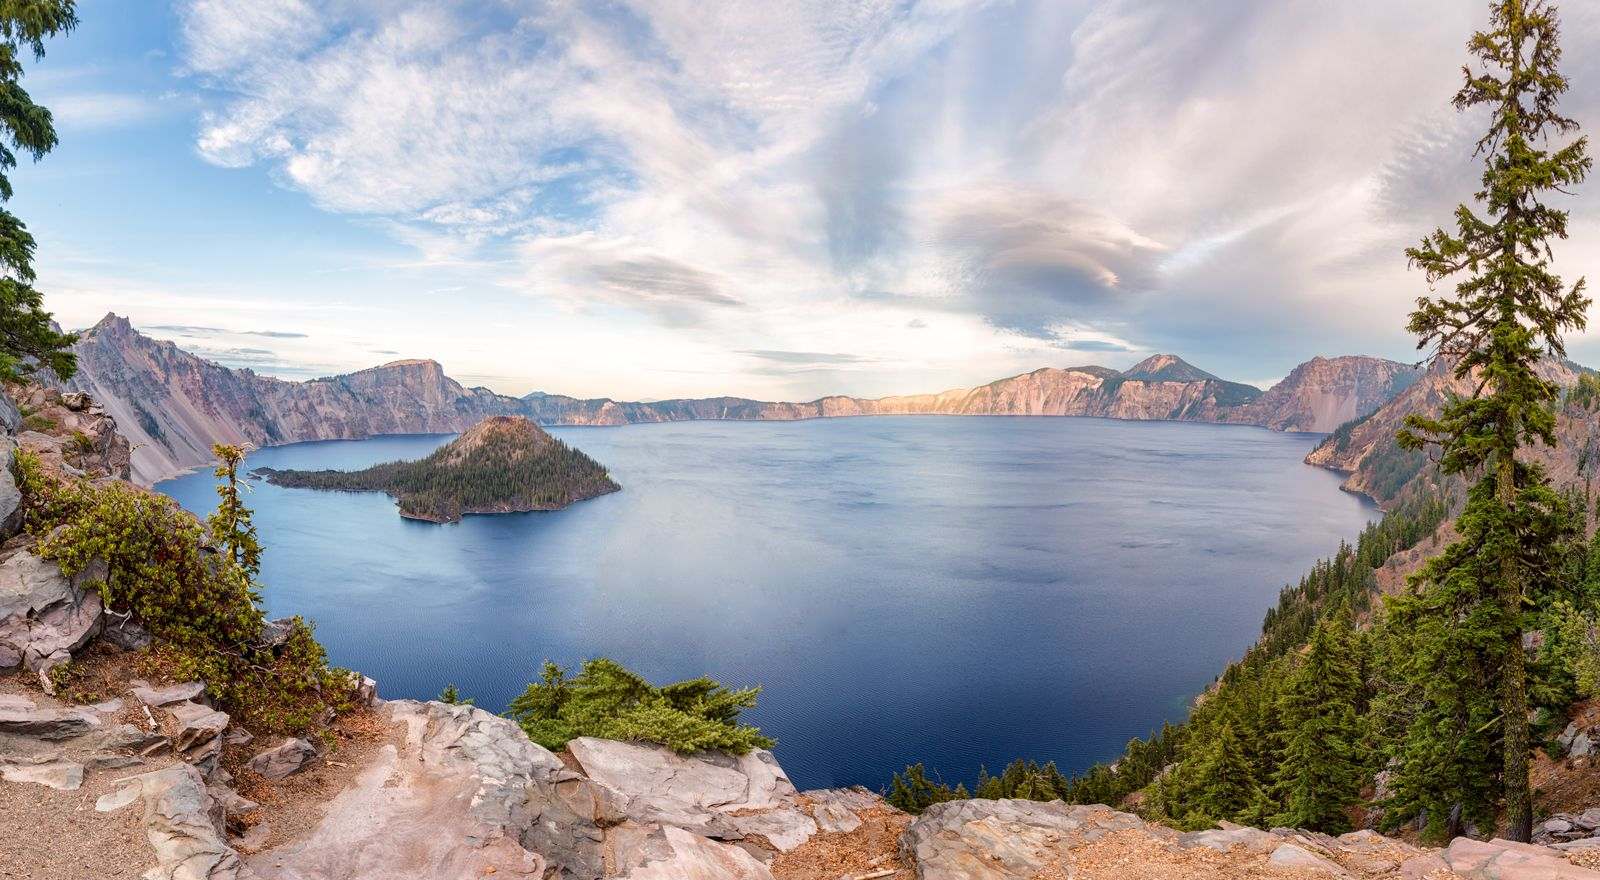 Things to Do at Crater Lake National Park: Hikes, Camping & When to Visit